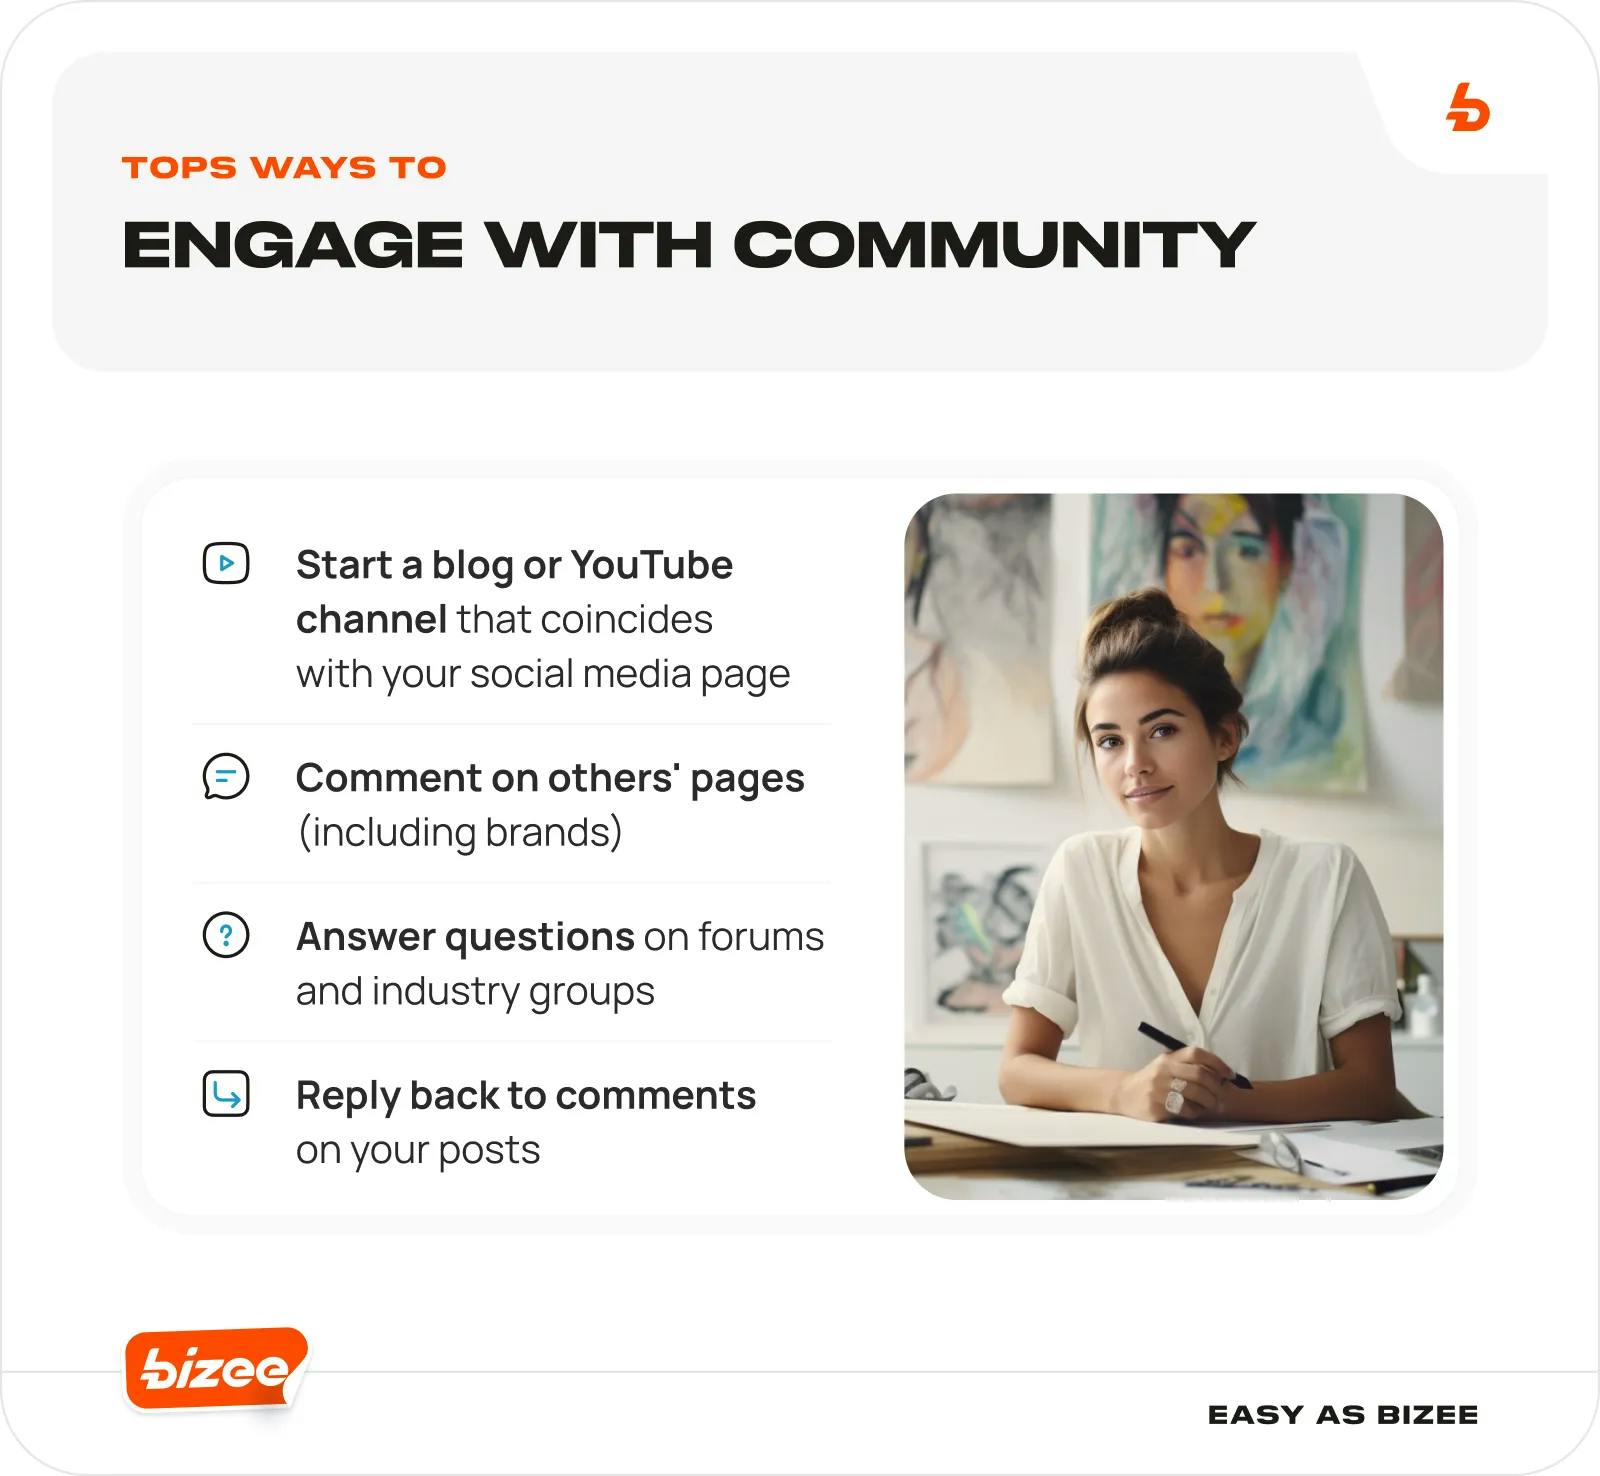 Tops Ways to Engage with Community